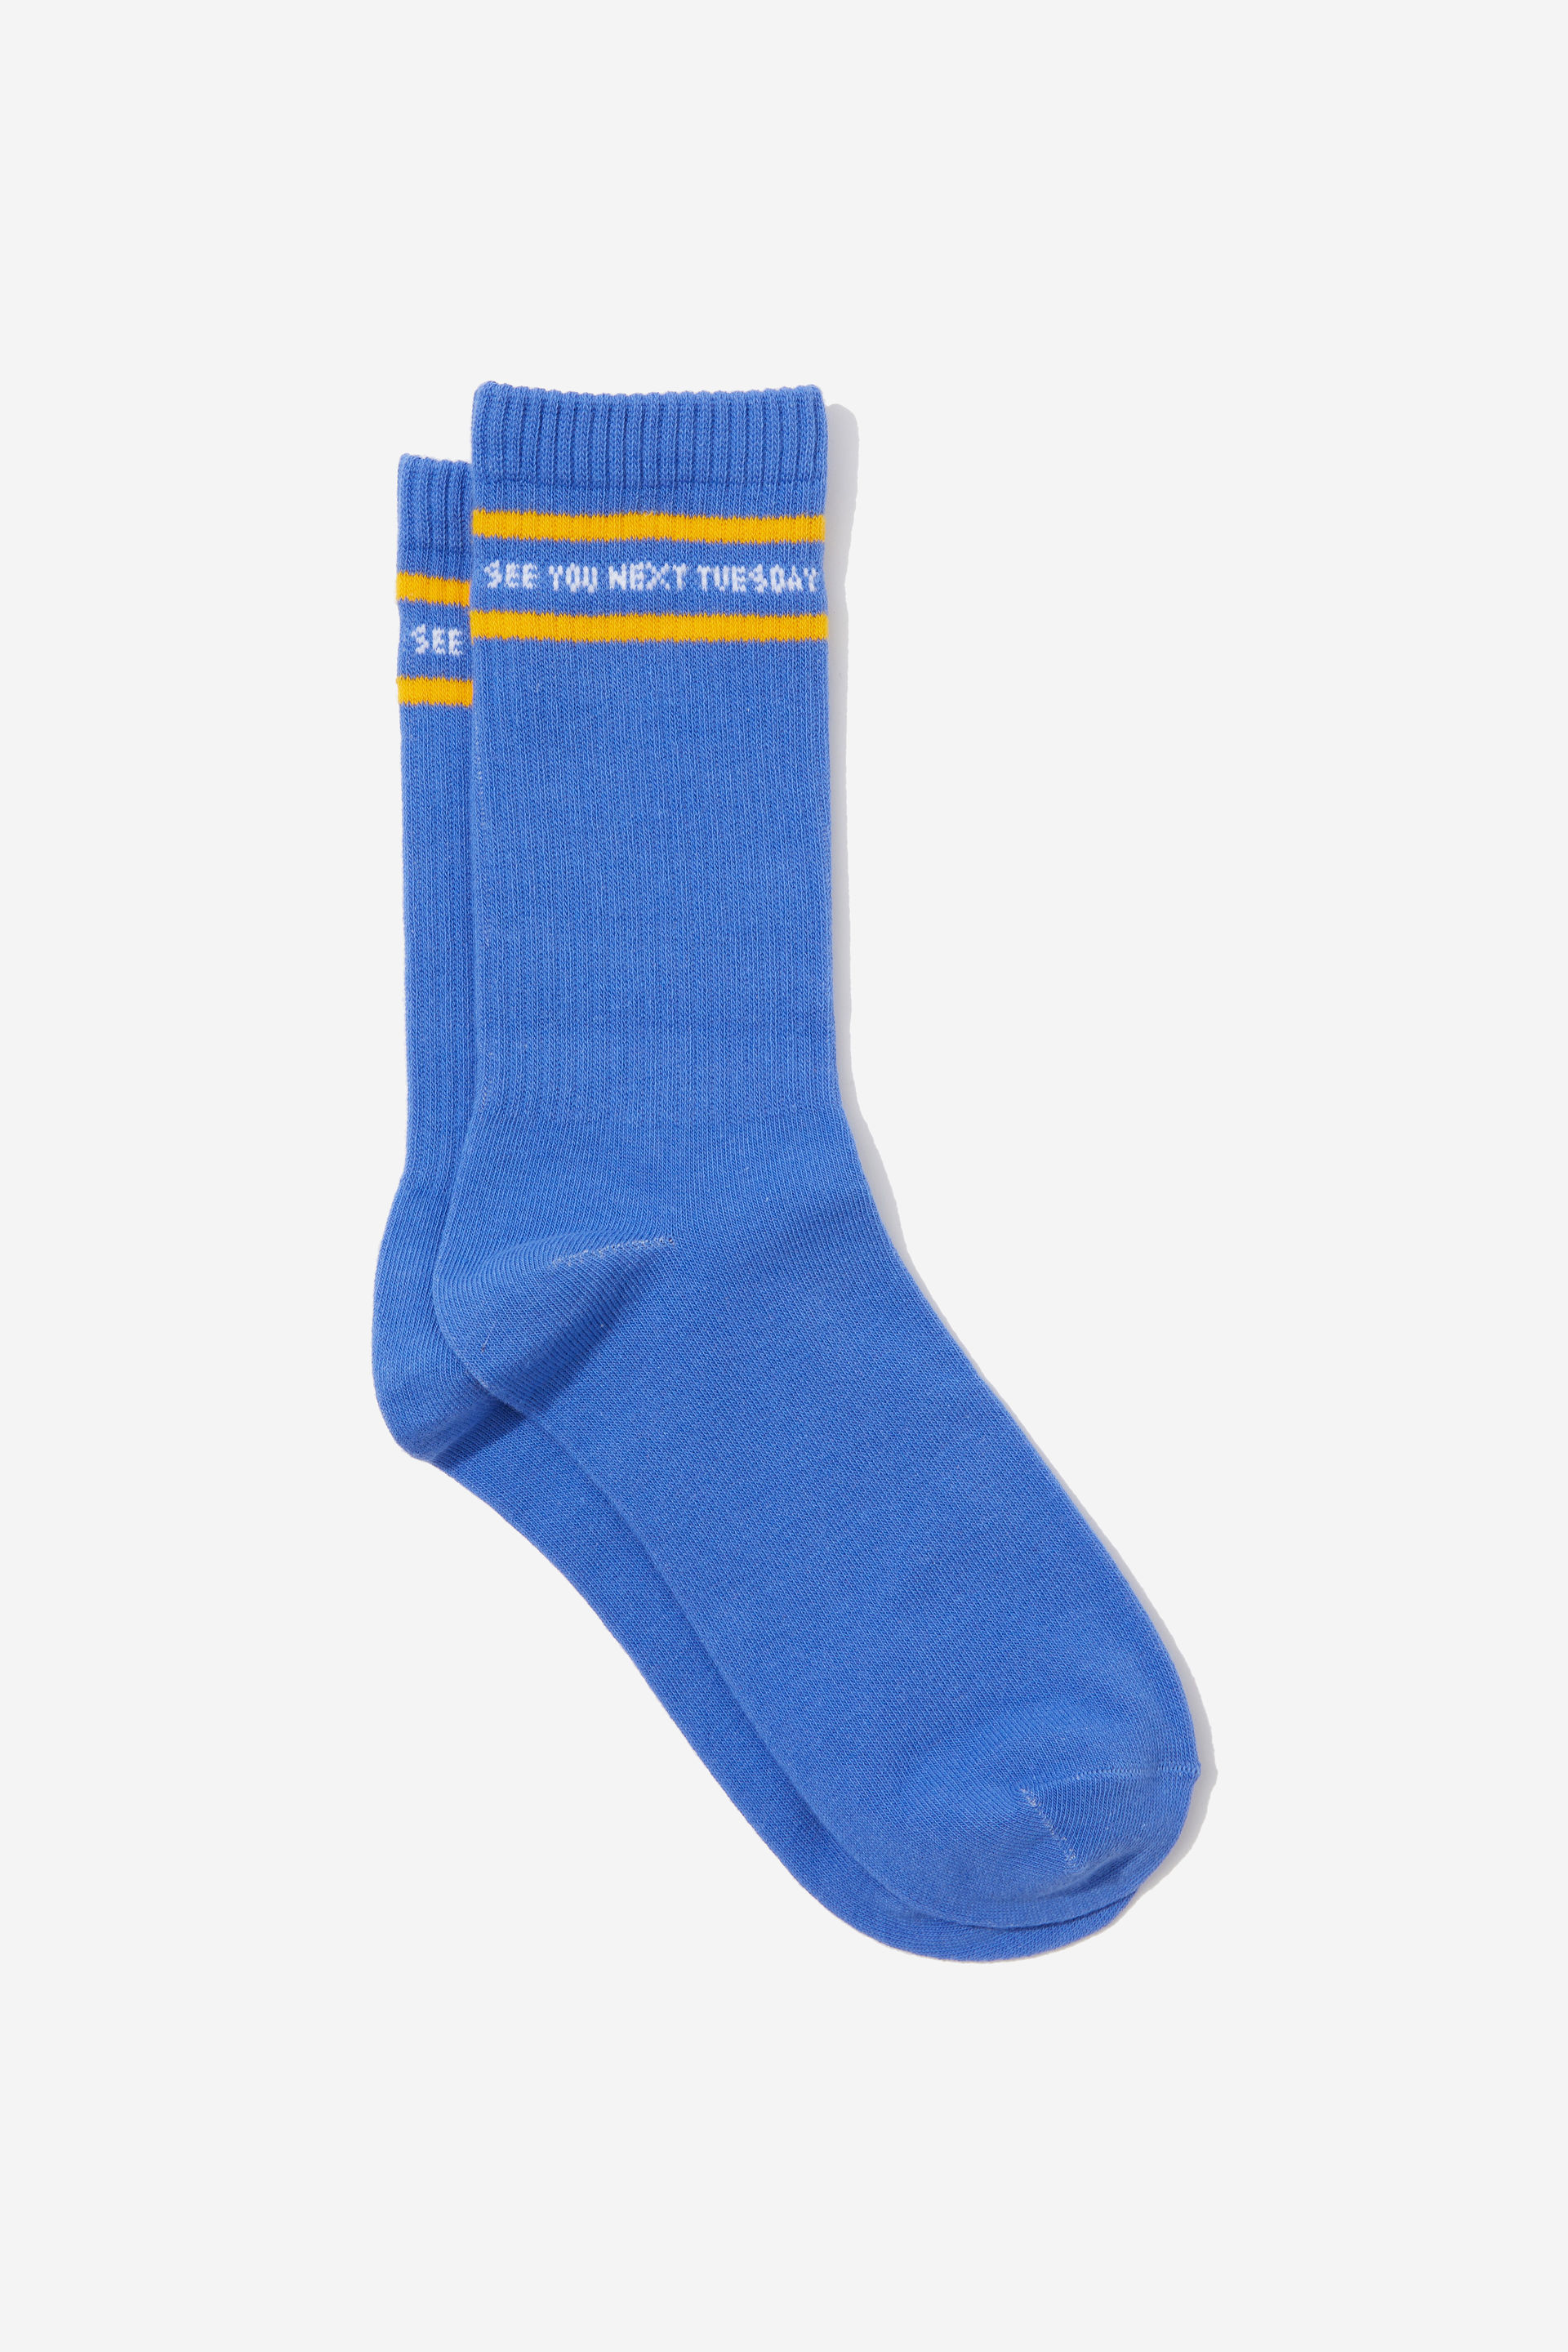 Typo - Socks - See you next tuesday blue!!